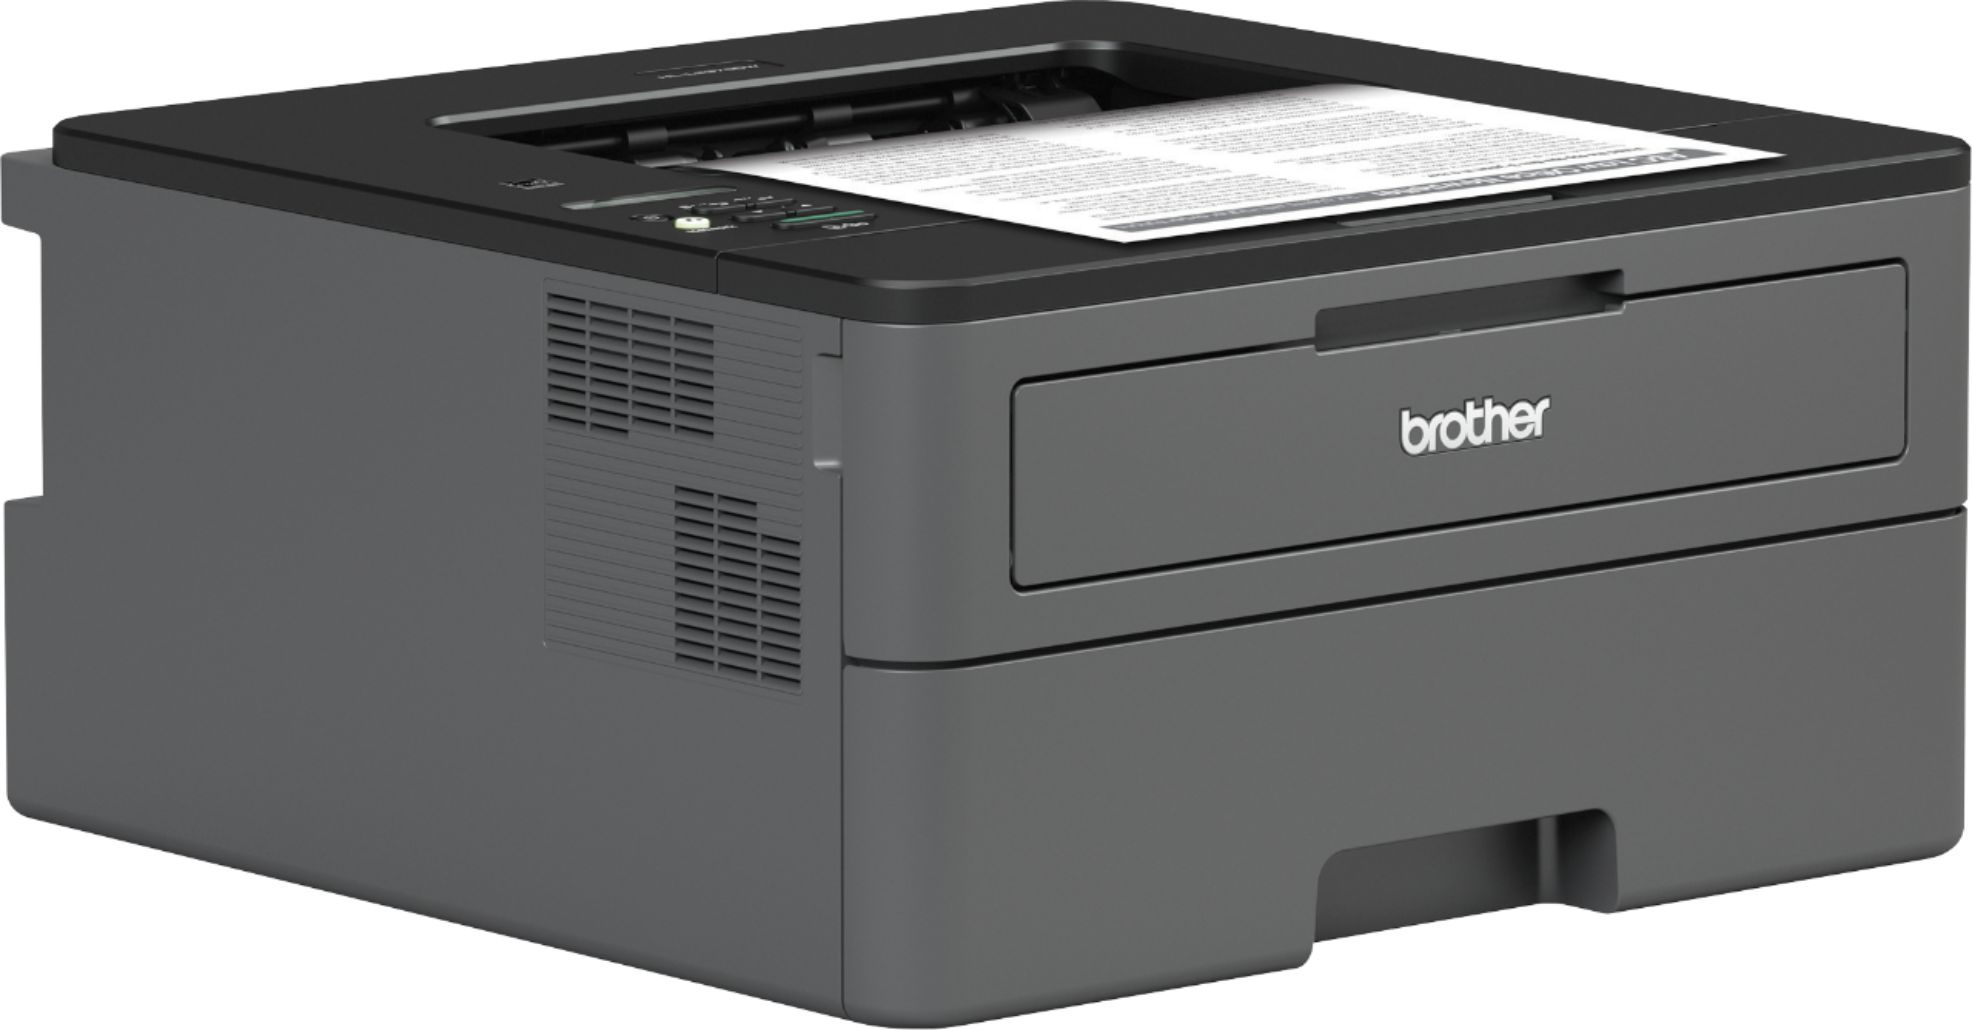 Angle View: Brother - HL-L2370DW Wireless Black-and-White Refresh Subscription Eligible Laser Printer - Gray